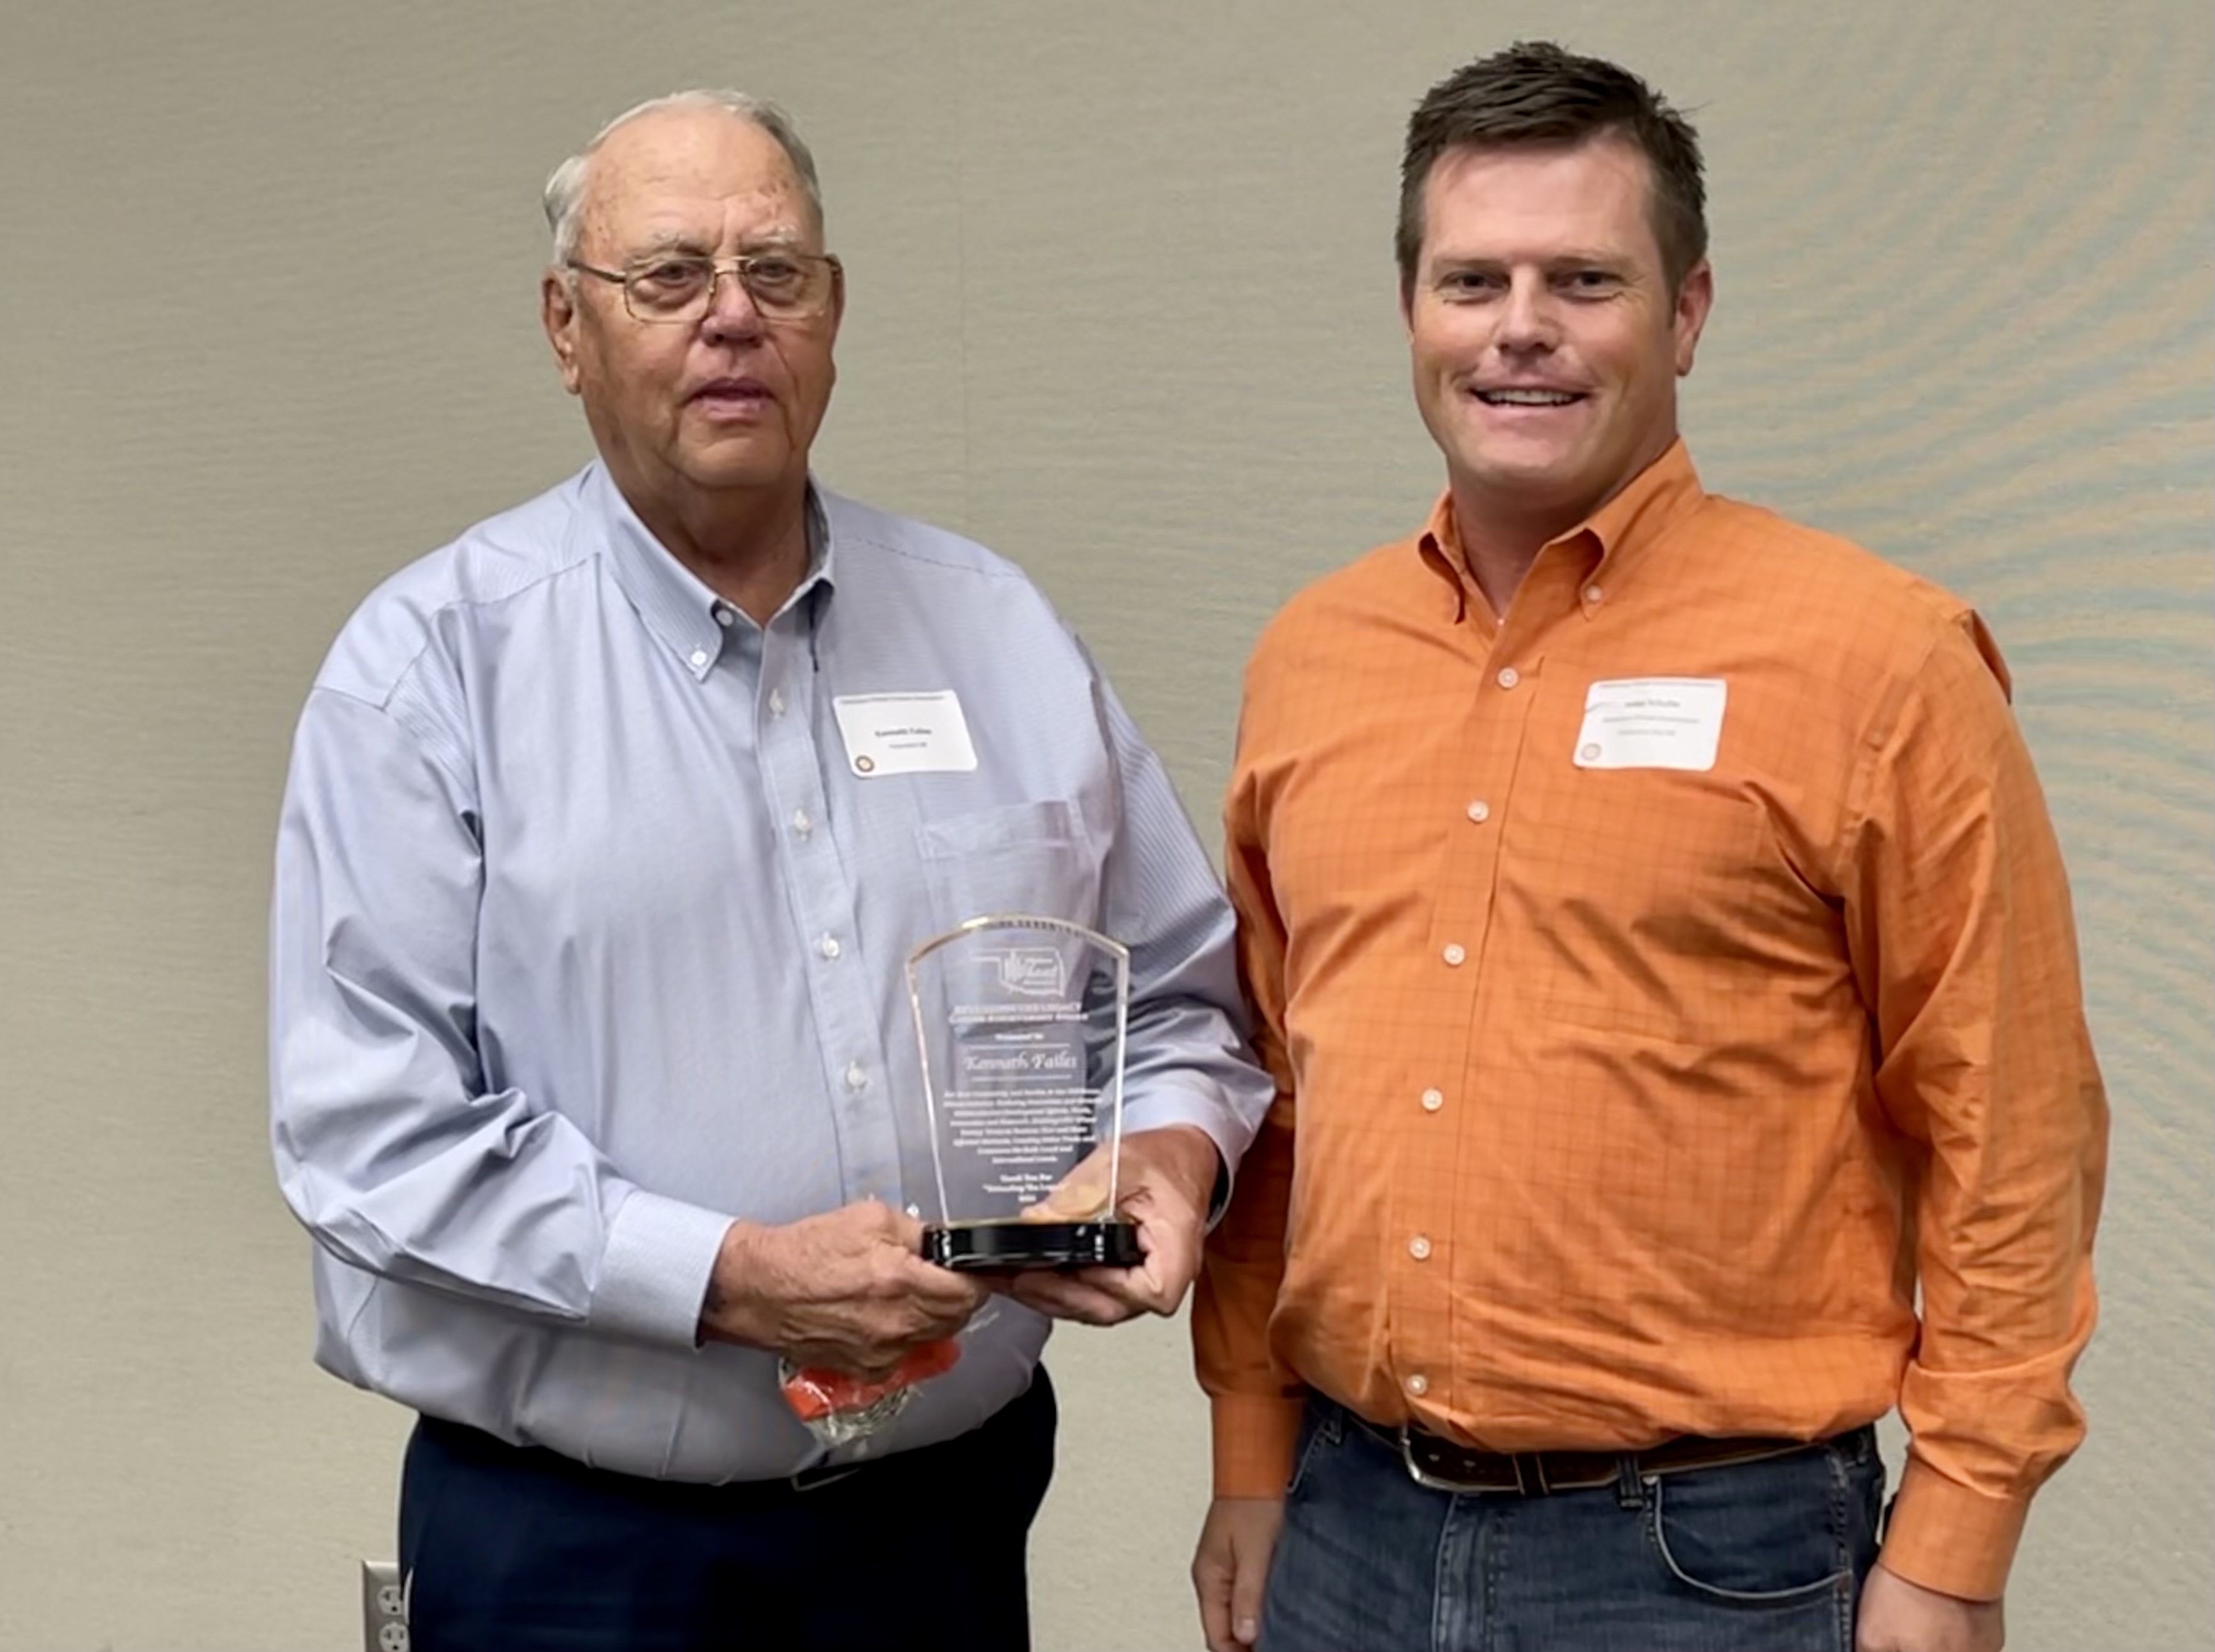 Oklahoma Wheat Growers and Wheat Commission Hand Out Awards at Annual Wheat Conference